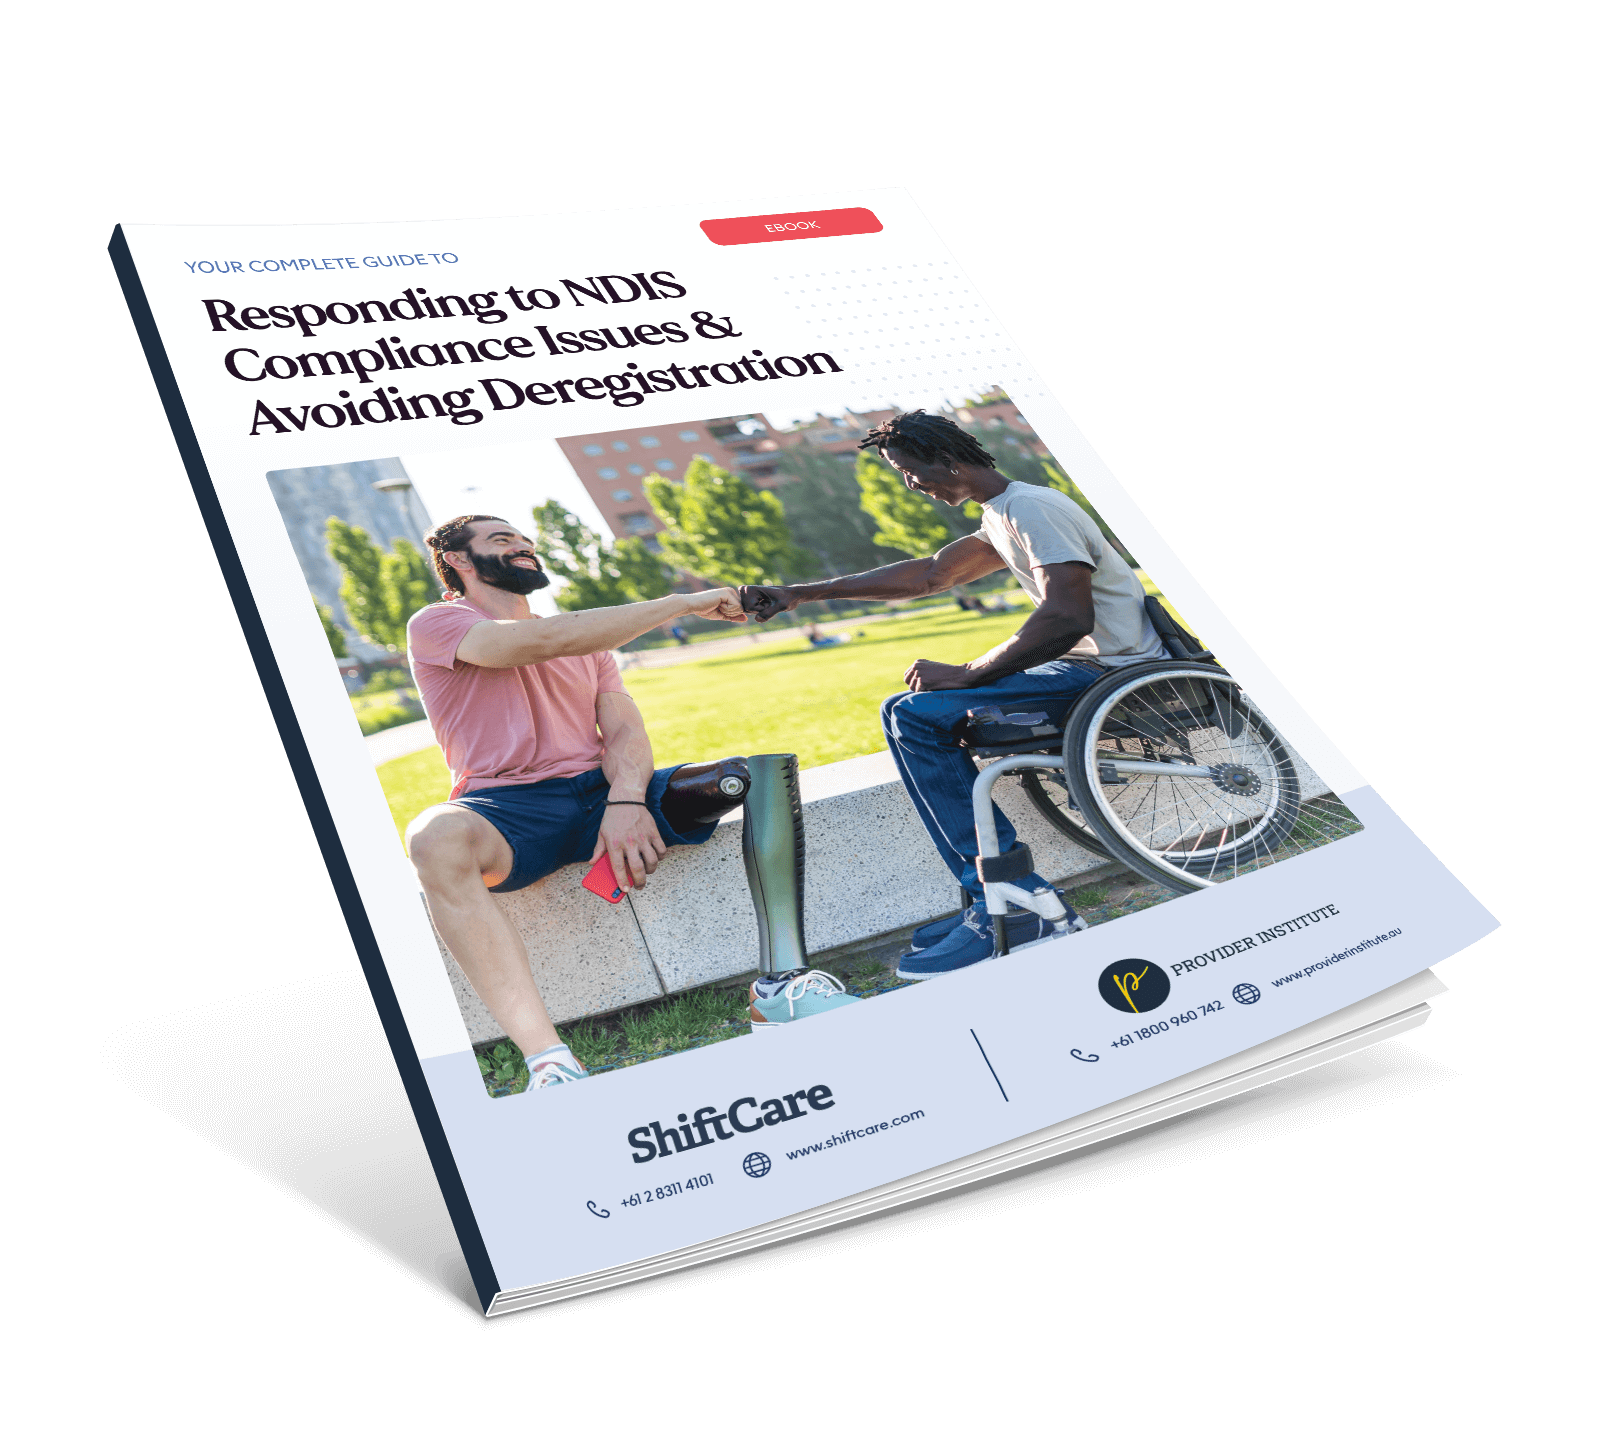 Cover art for Provider Institute's guide to meeting NDIS compliance requirements